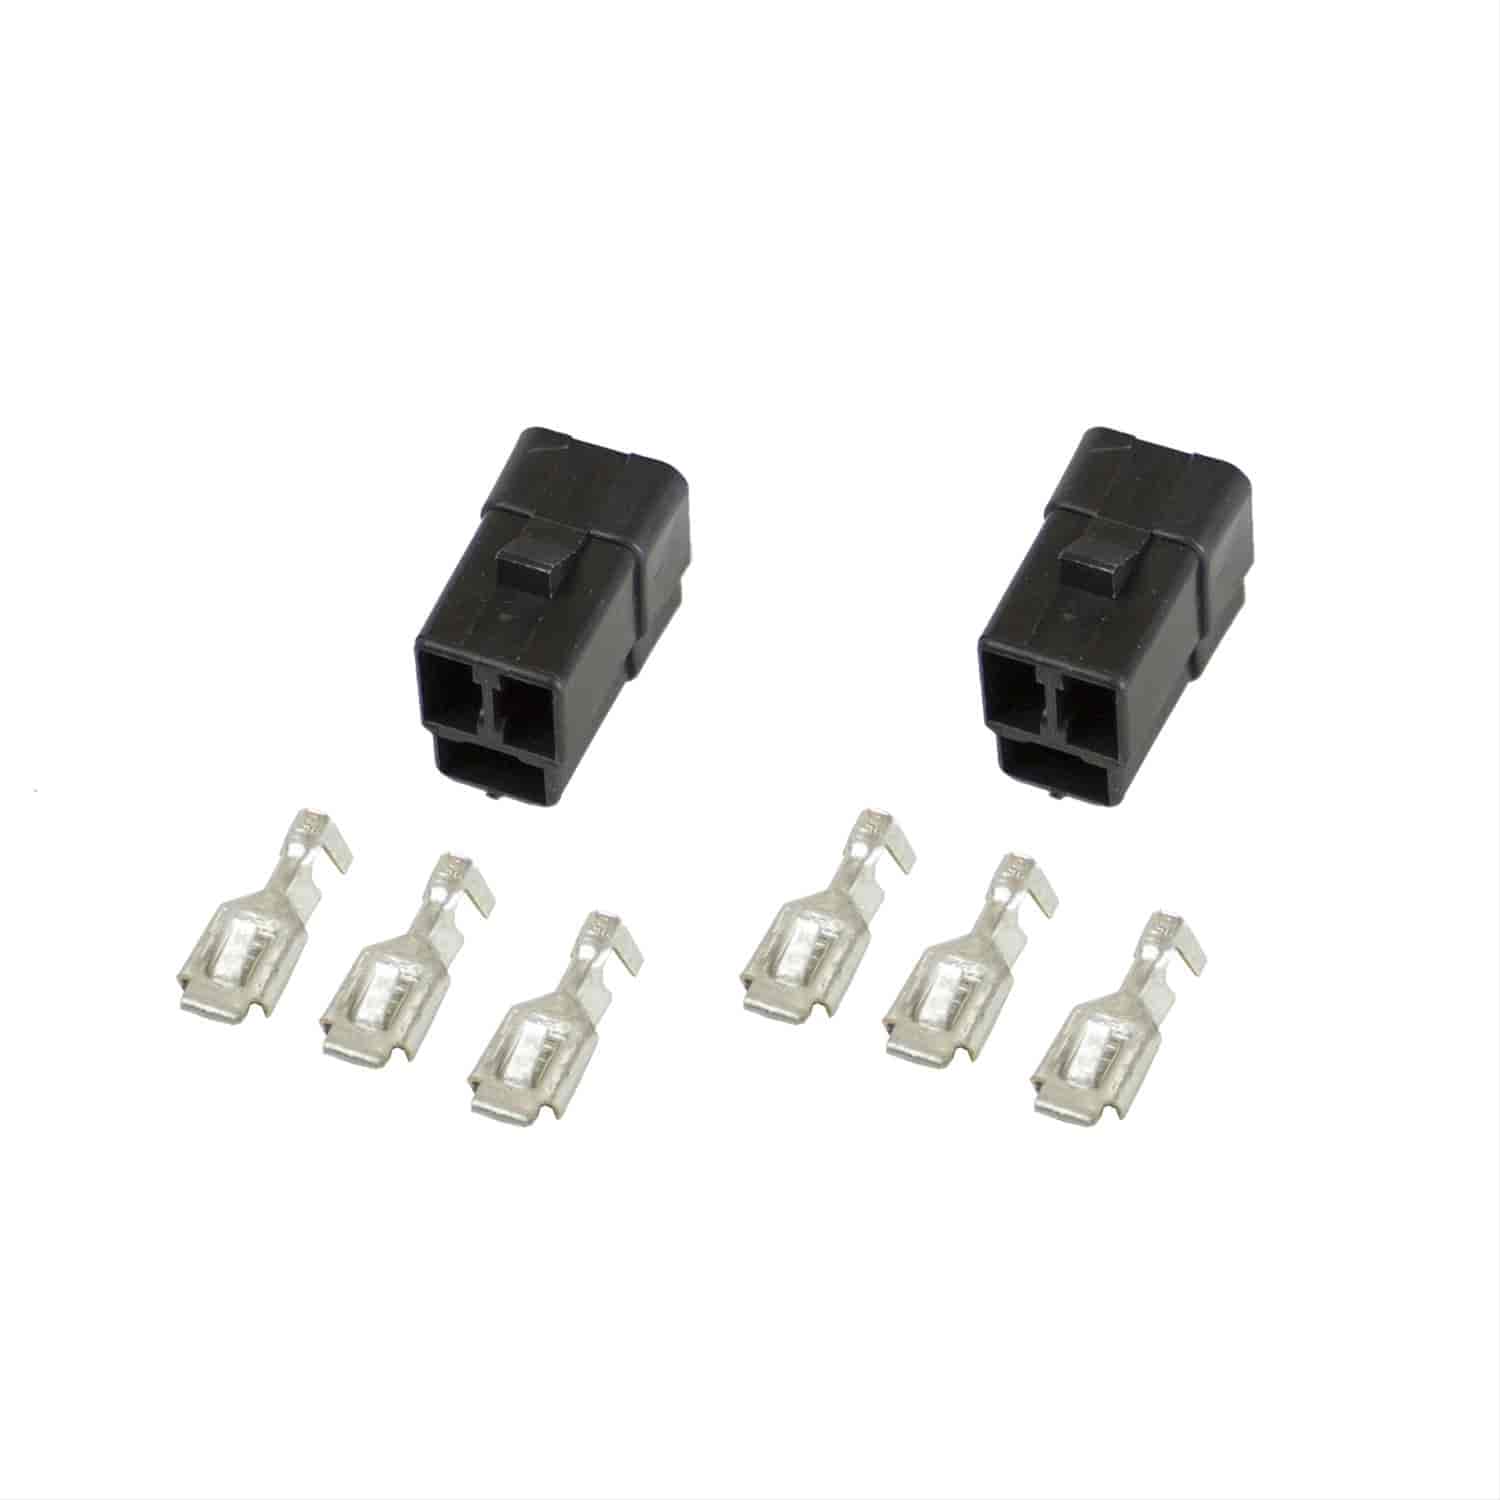 3-Terminal Wiring Connectors For Electrical Short Sweep Gauges